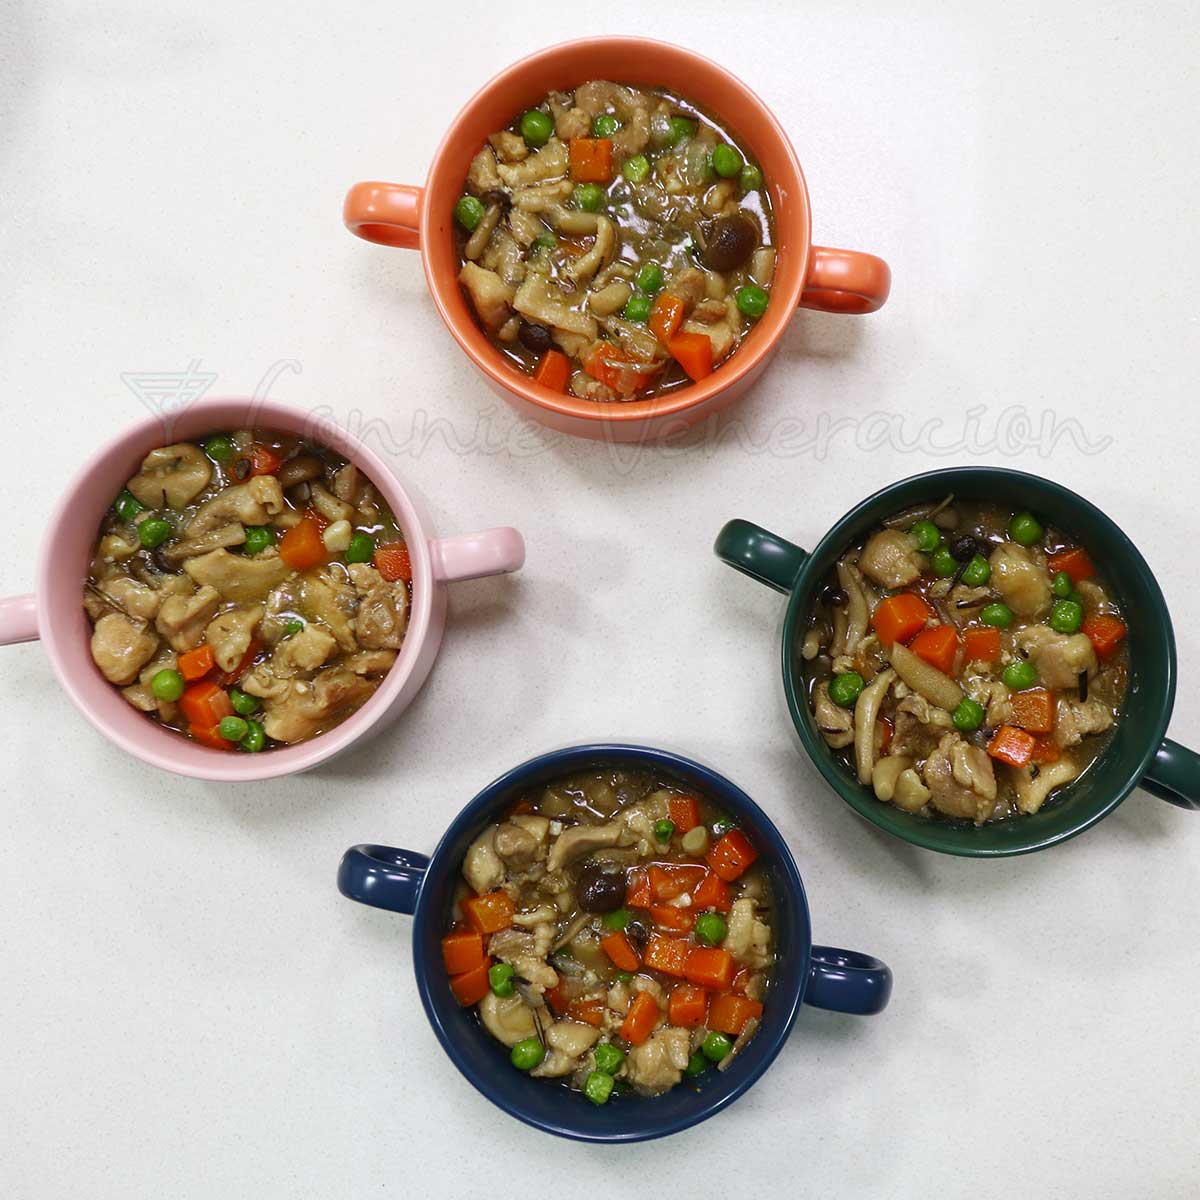 Chicken, mushrooms and vegetables with gravy in single-serve bowls